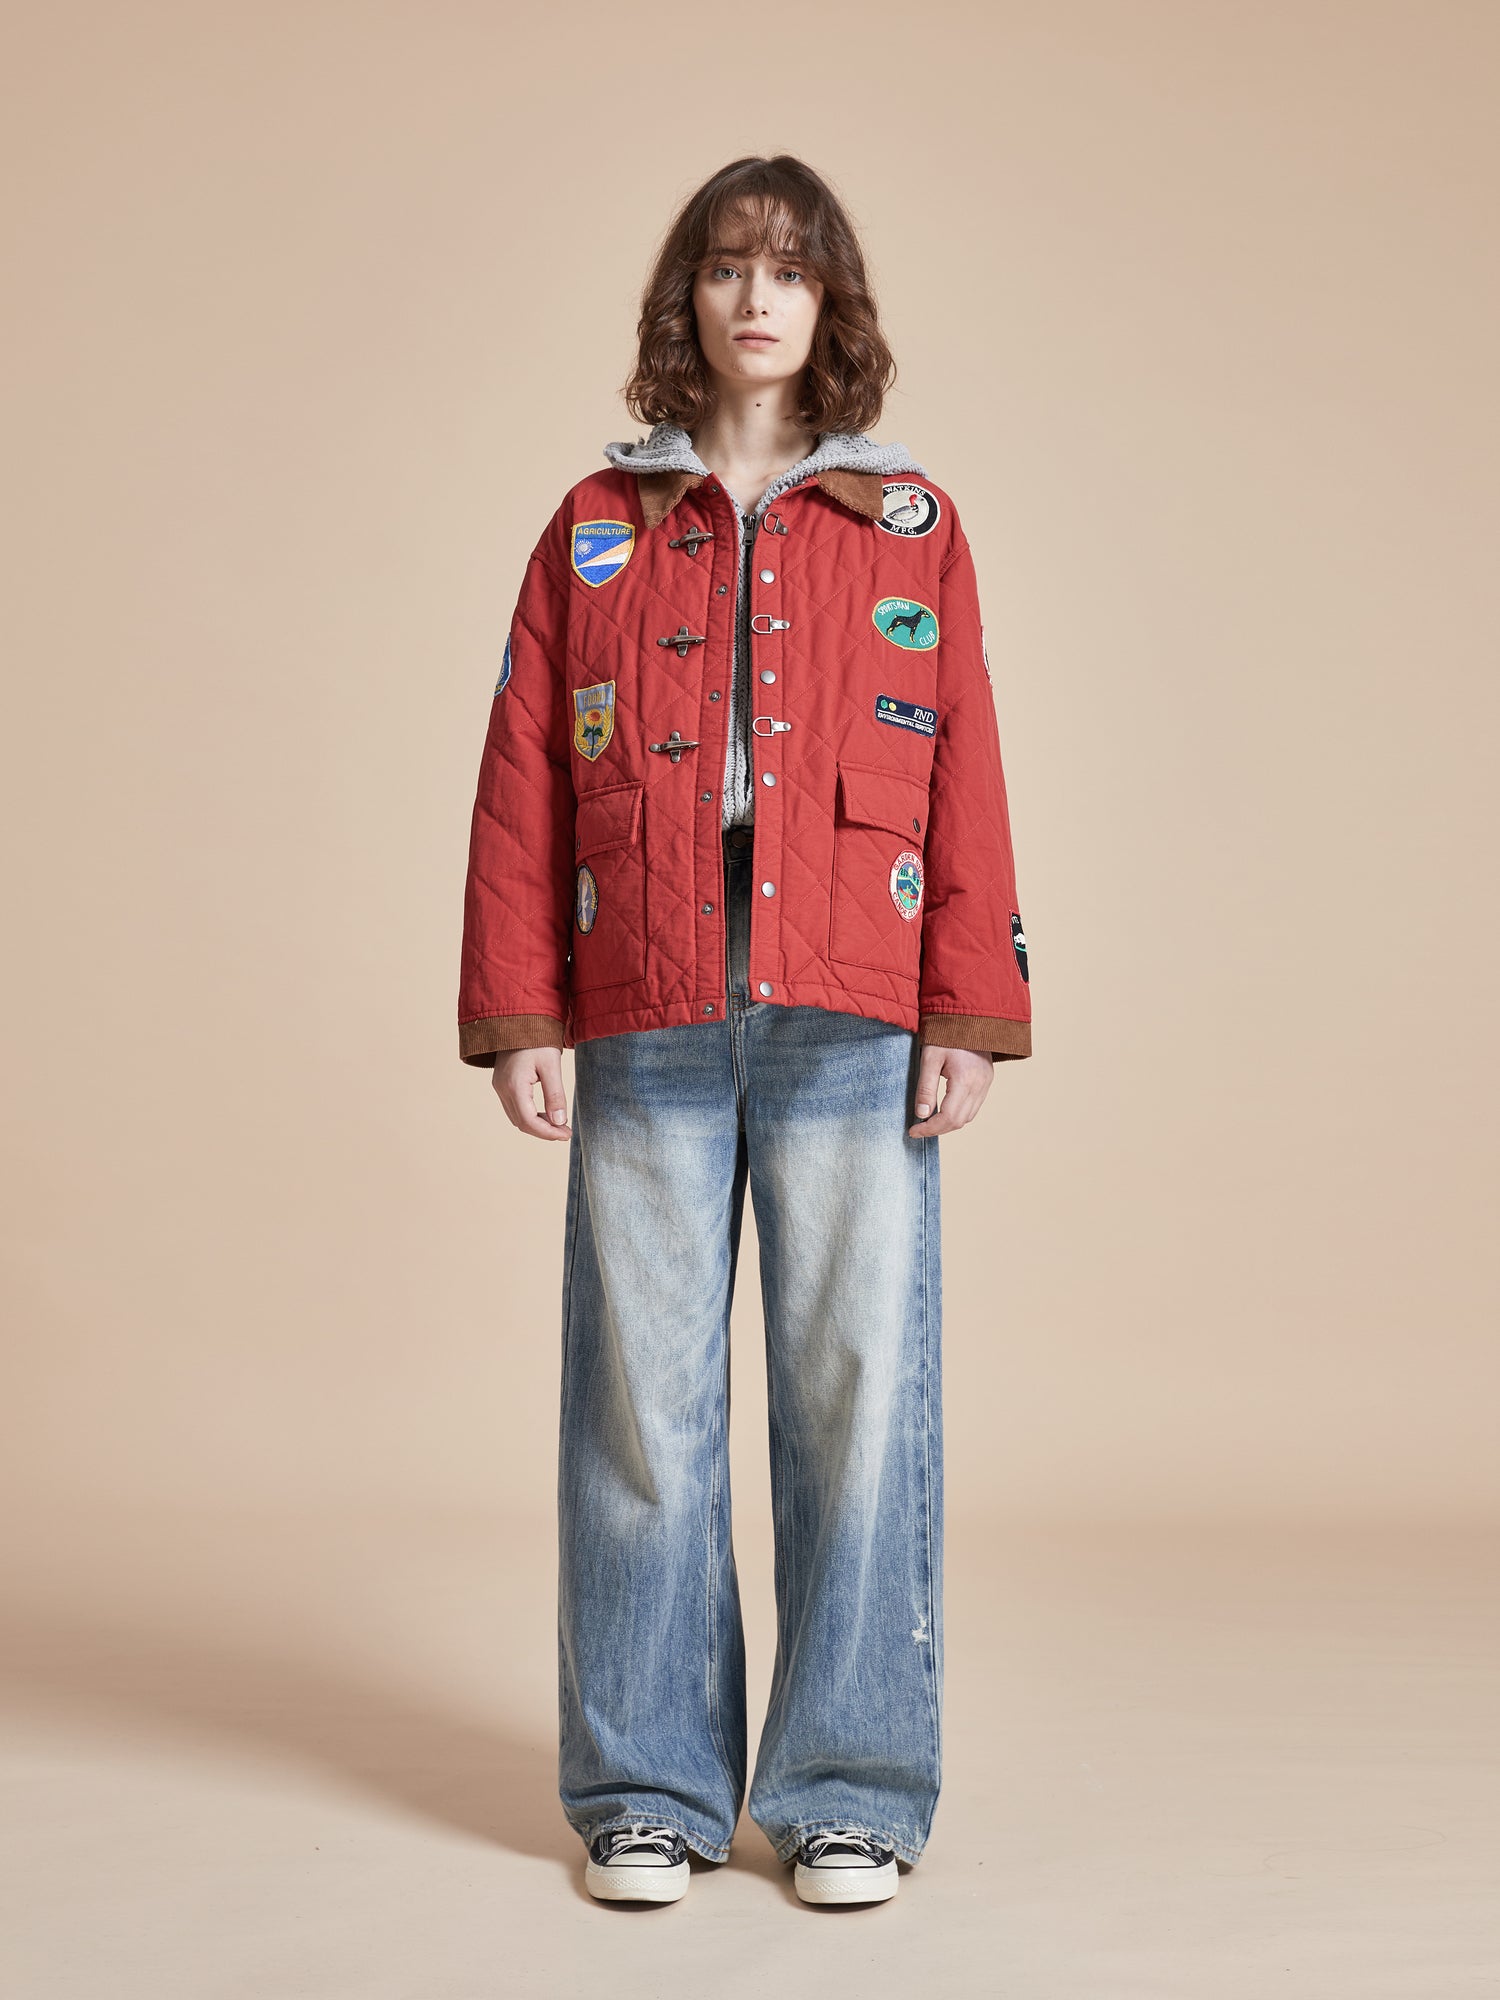 A woman wearing a Farmstead Quilt Patch Jacket by Found and jeans.